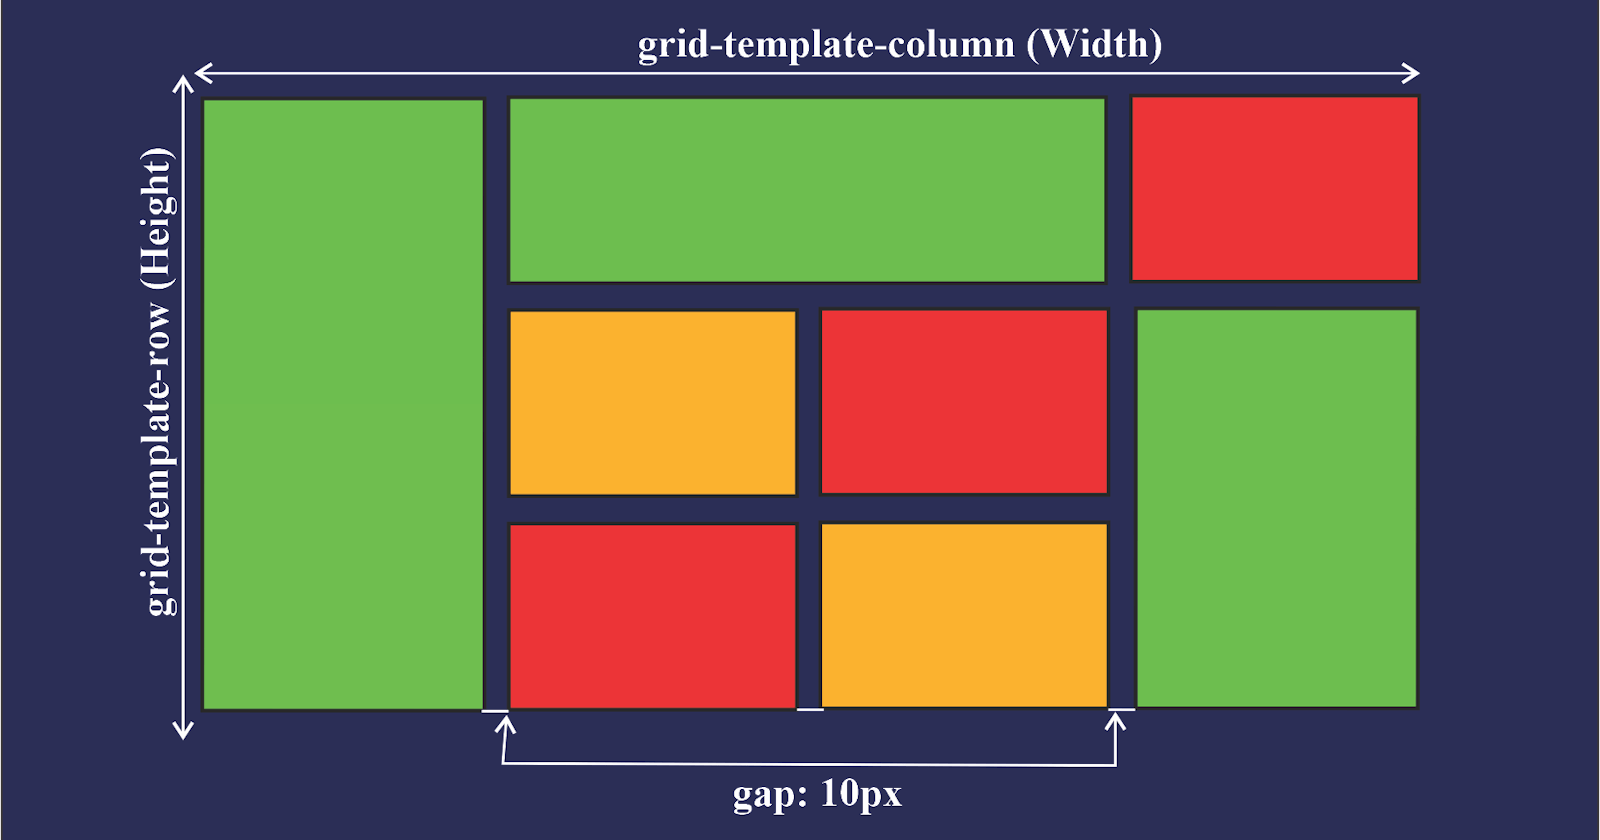 Grid in CSS